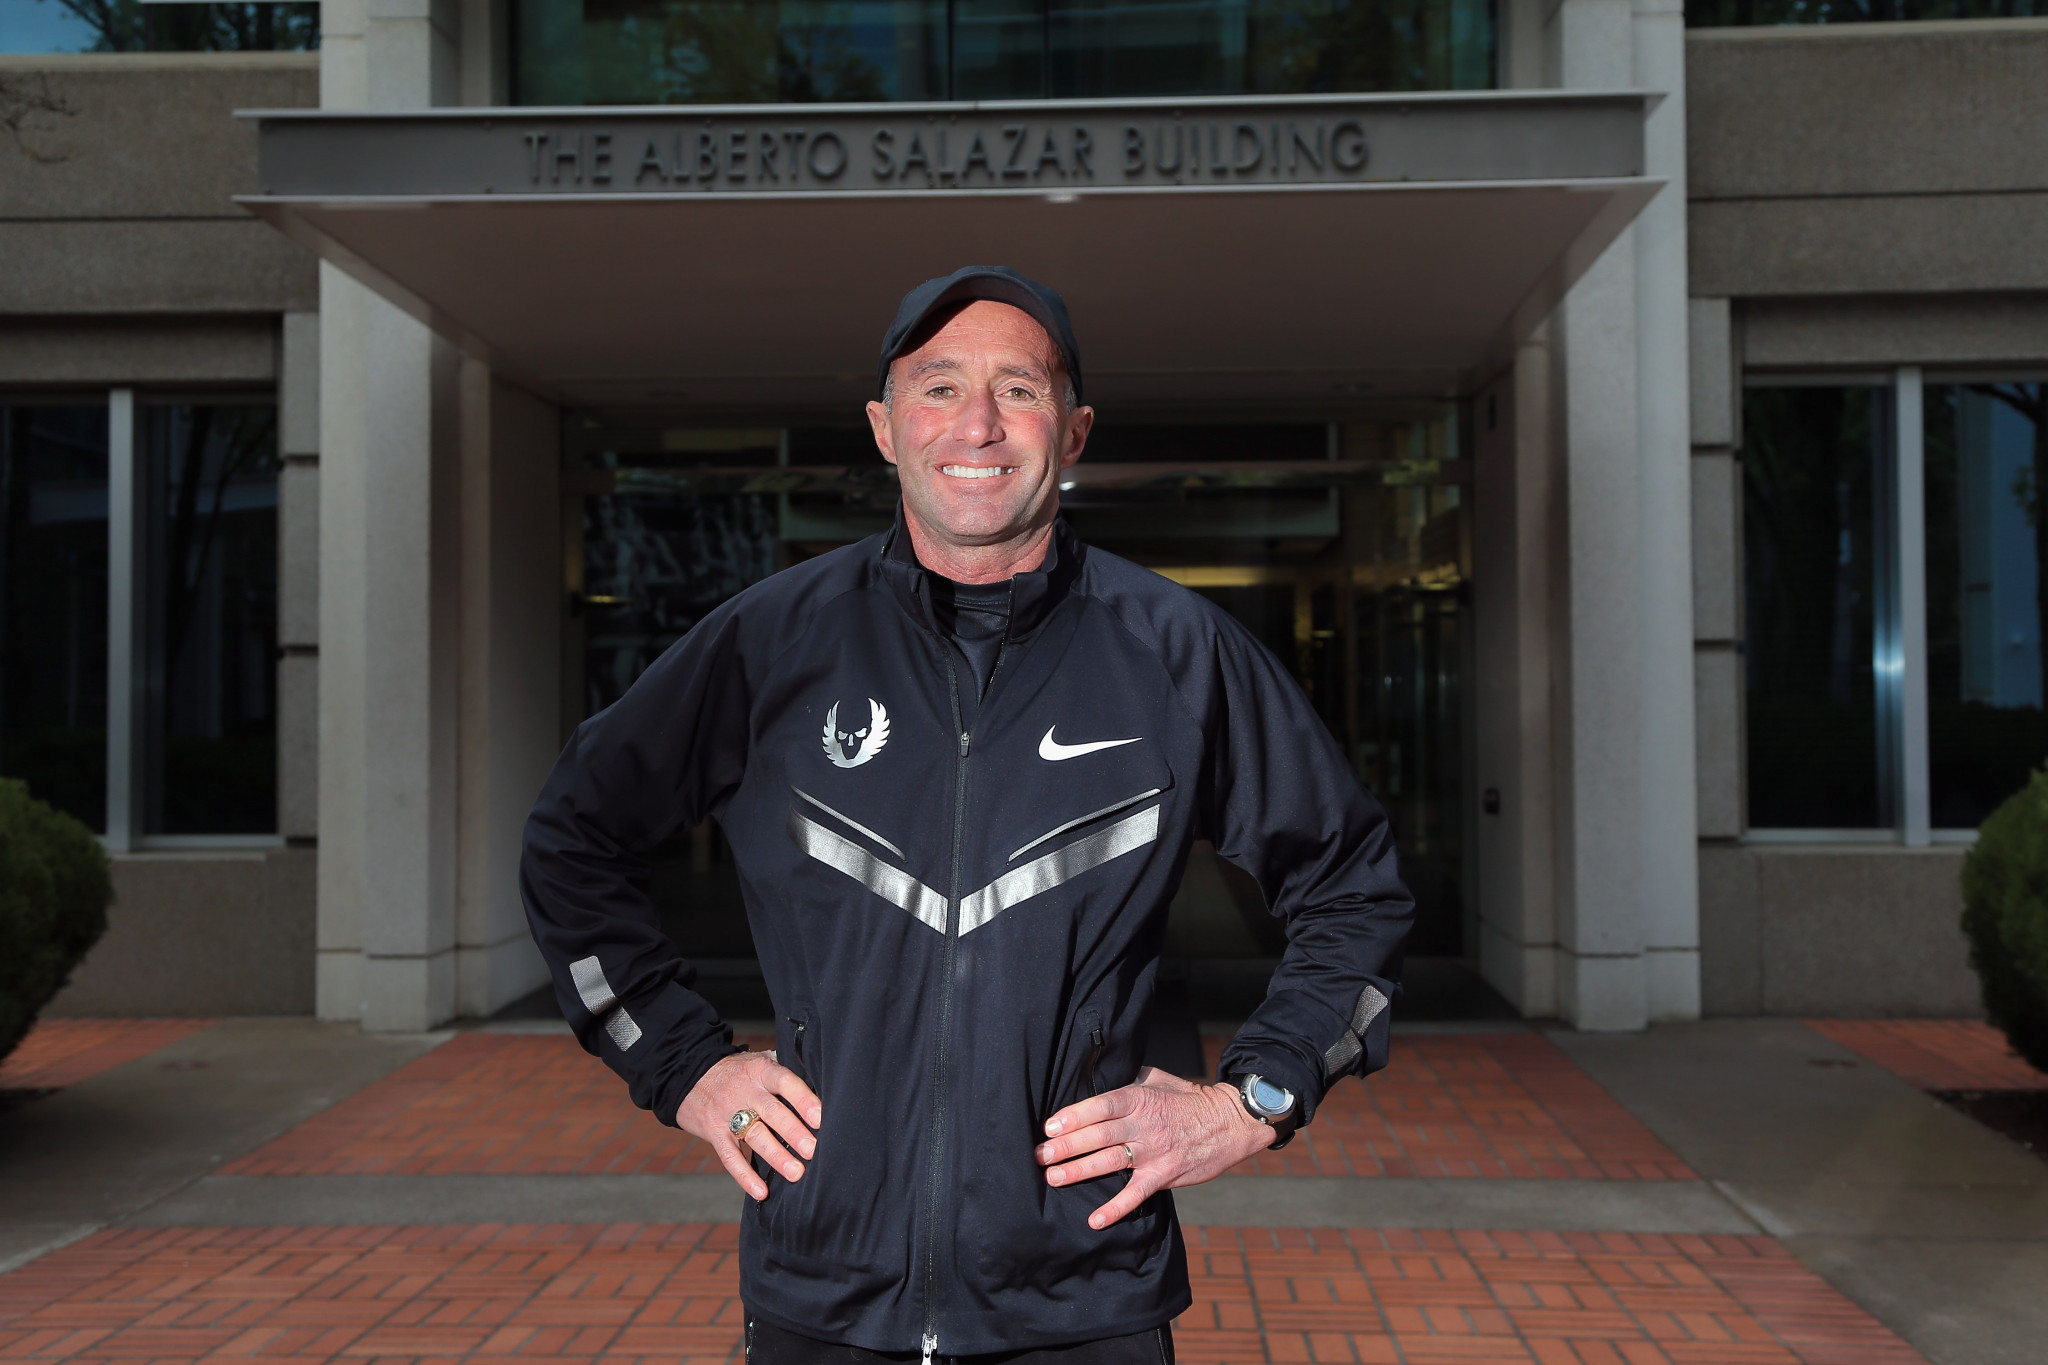 Alberto Salazar poses in front of the building that was named after him on the Nike campus in 2013 ©Getty Images